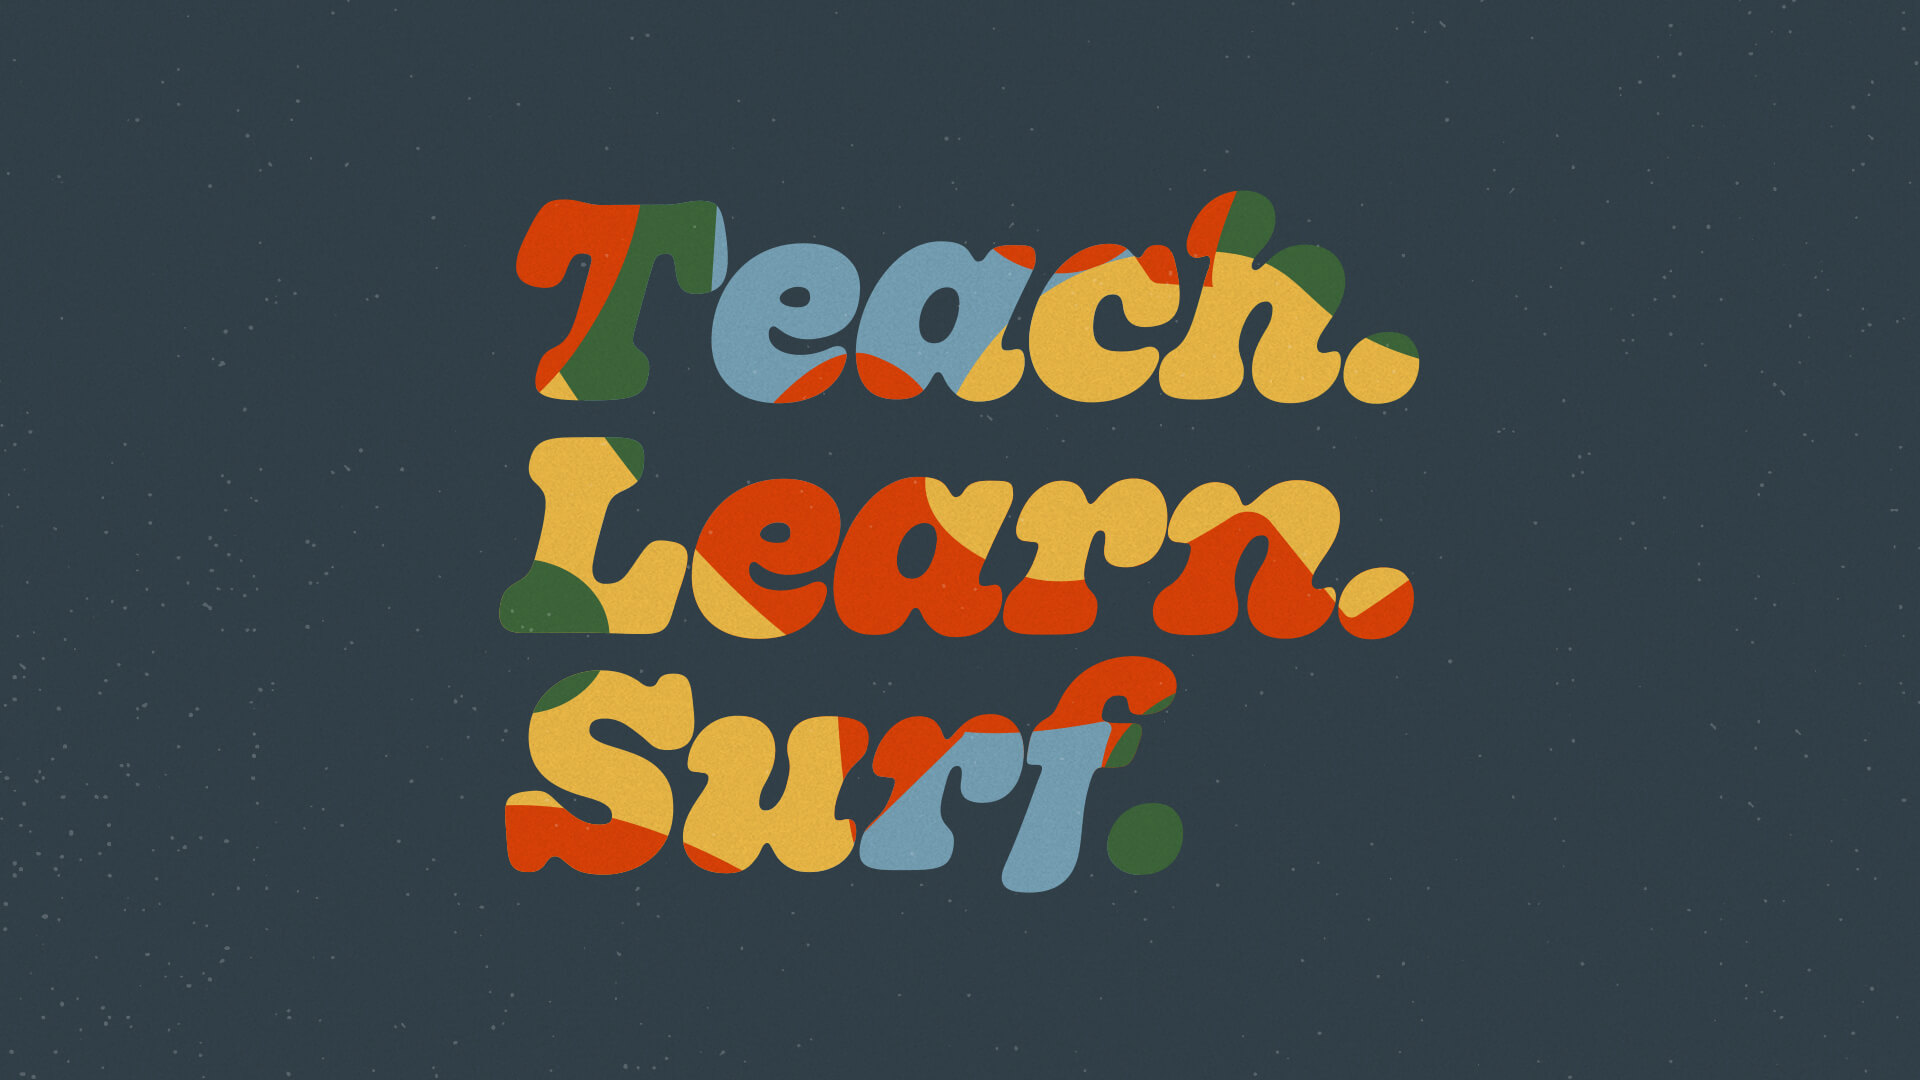 Teach. Learn. Surf. - InstructureCon 2019